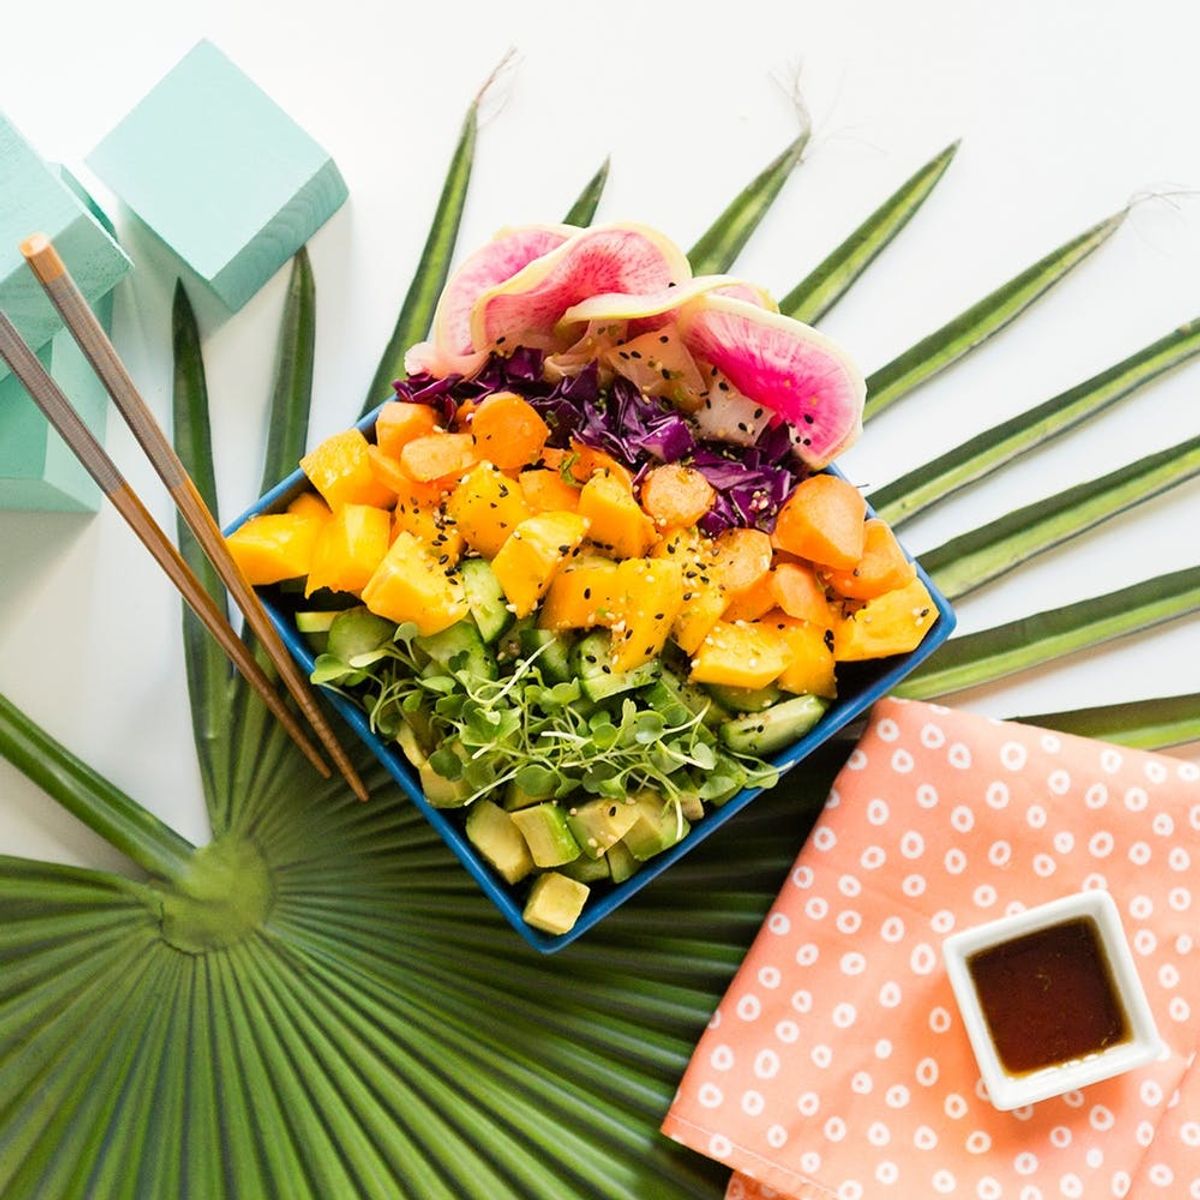 Feast Like a Mermaid With This Veg Bowl